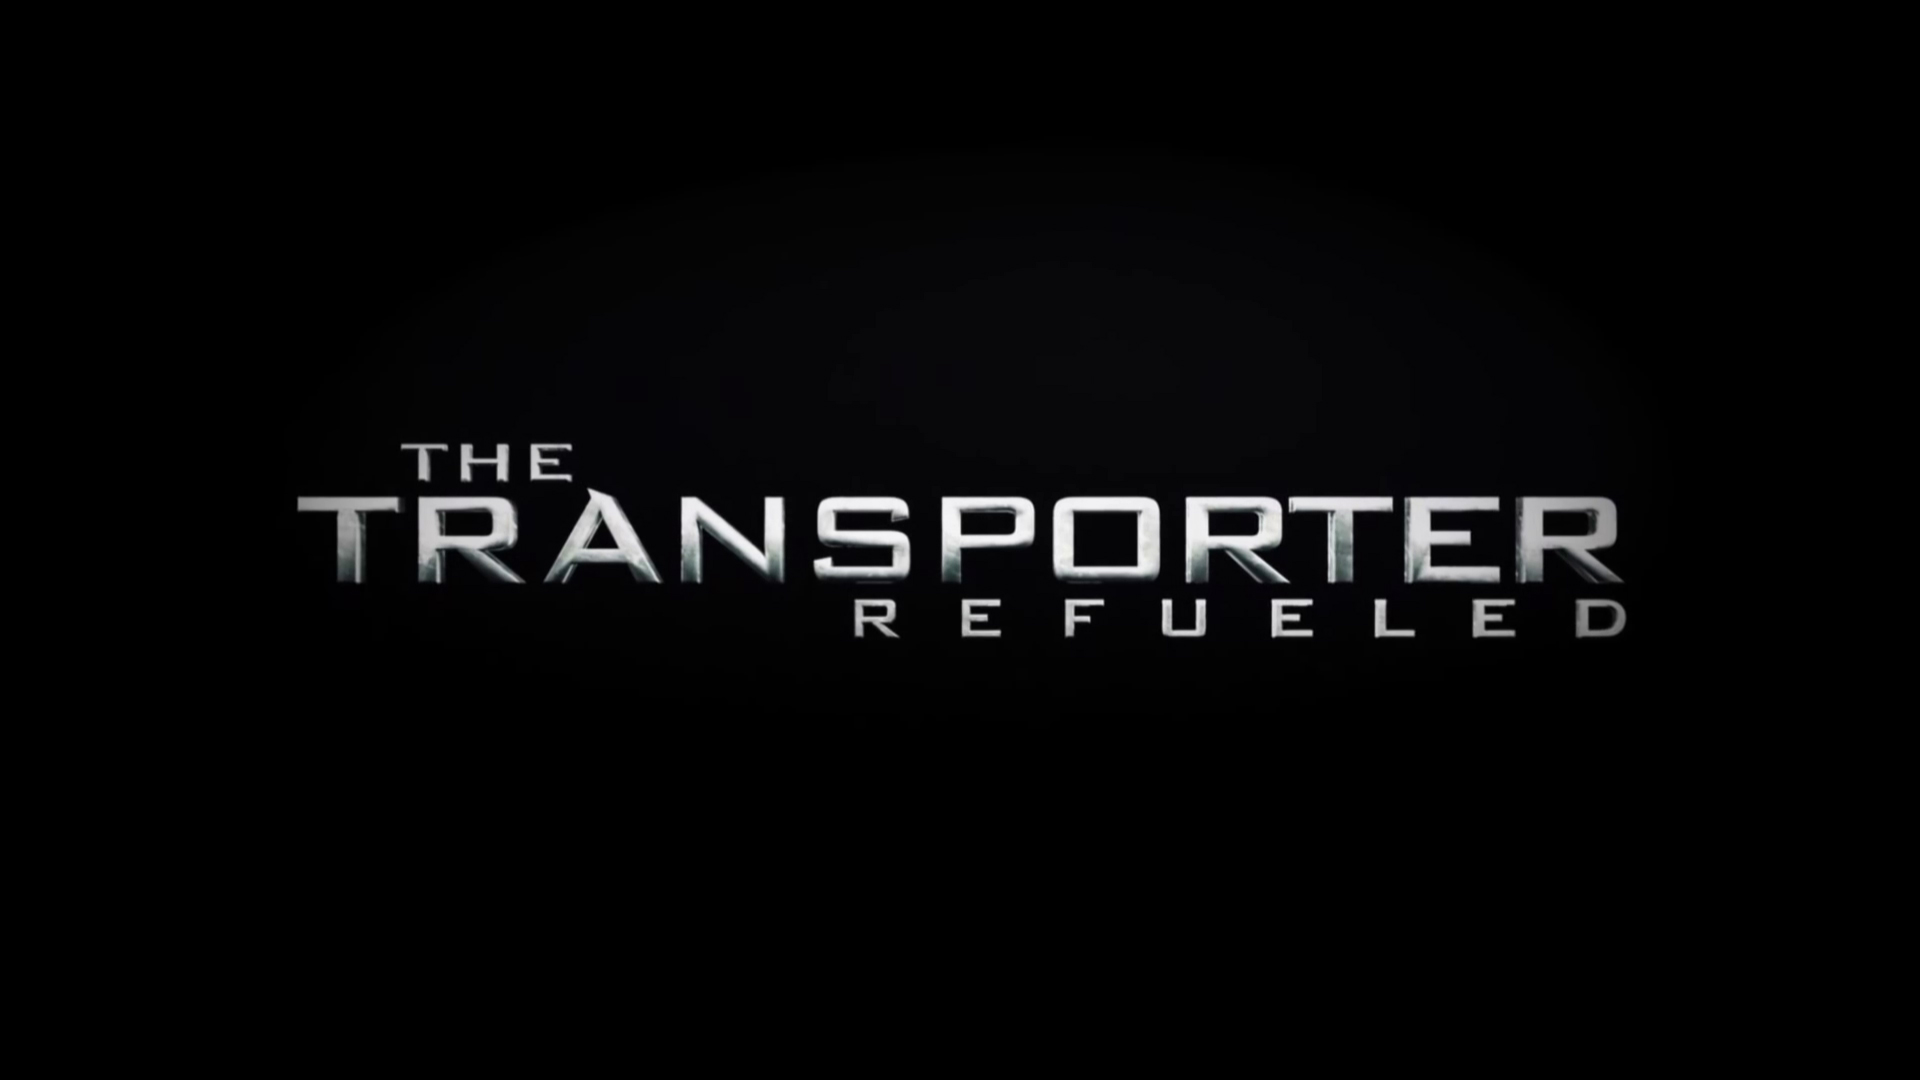 The Transporter Refueled #8